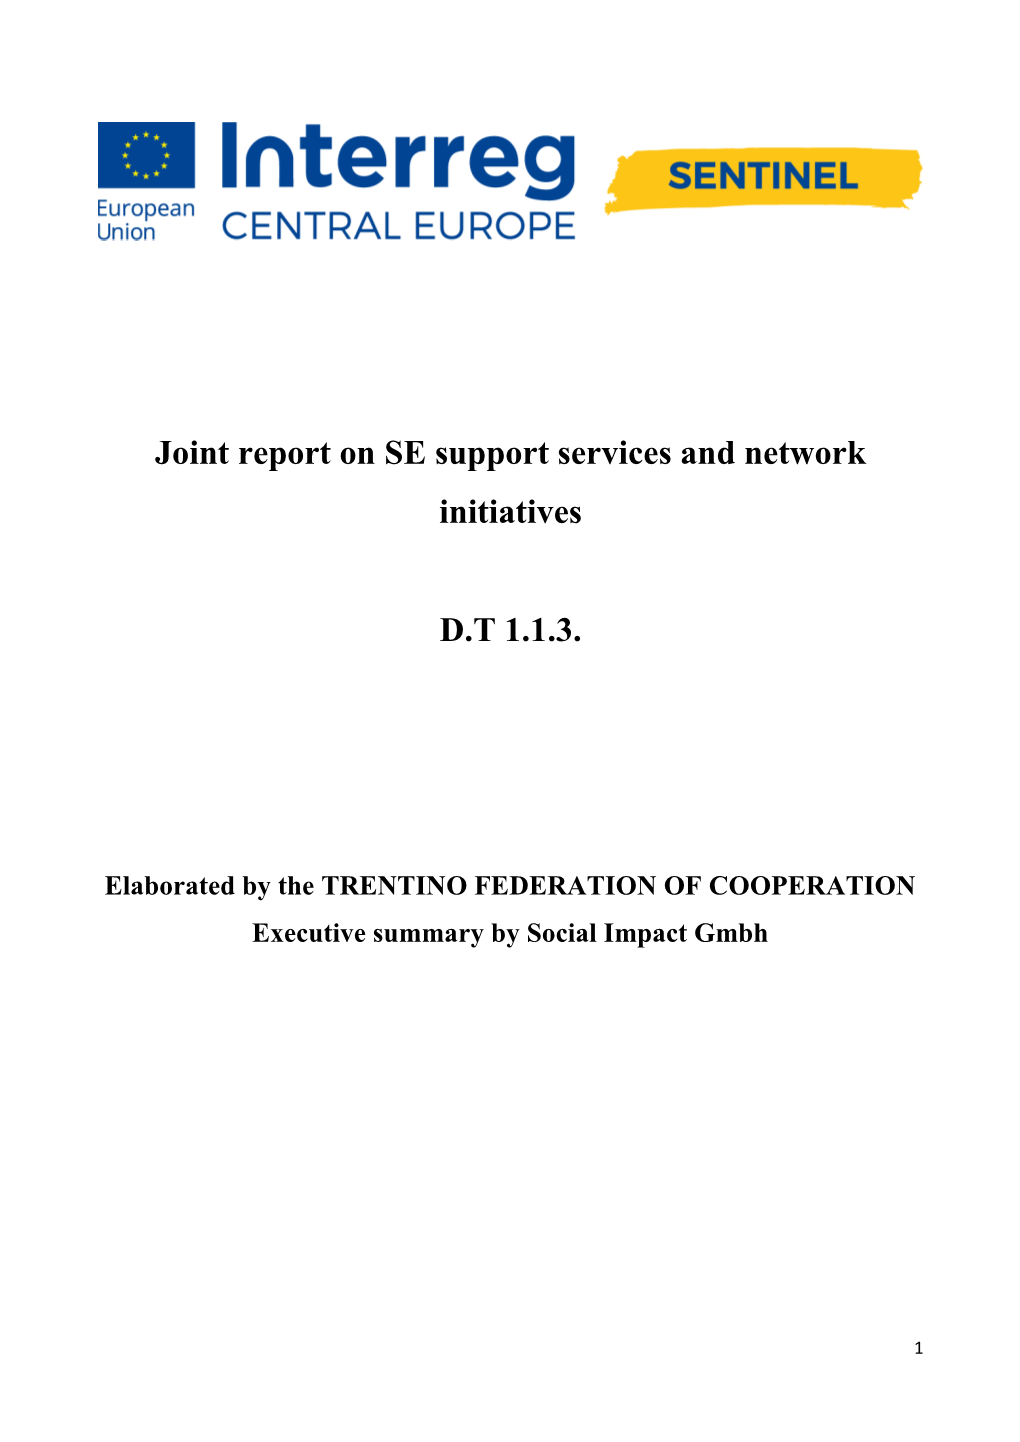 Joint Report on SE Support Services and Network Initiatives D.T 1.1.3